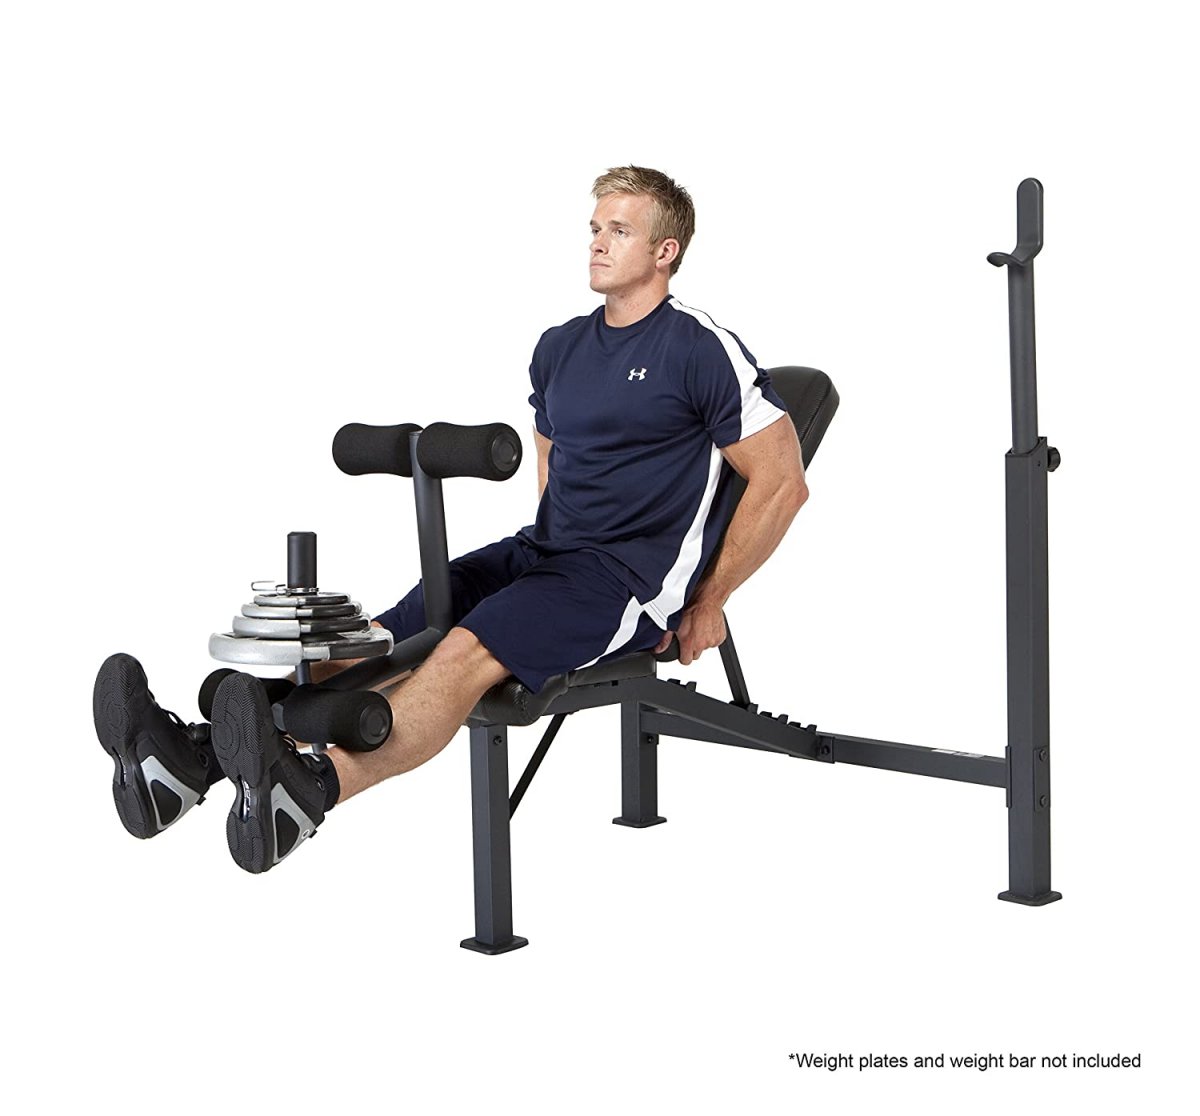 Marcy hg3000 Compact Home Gym exercise